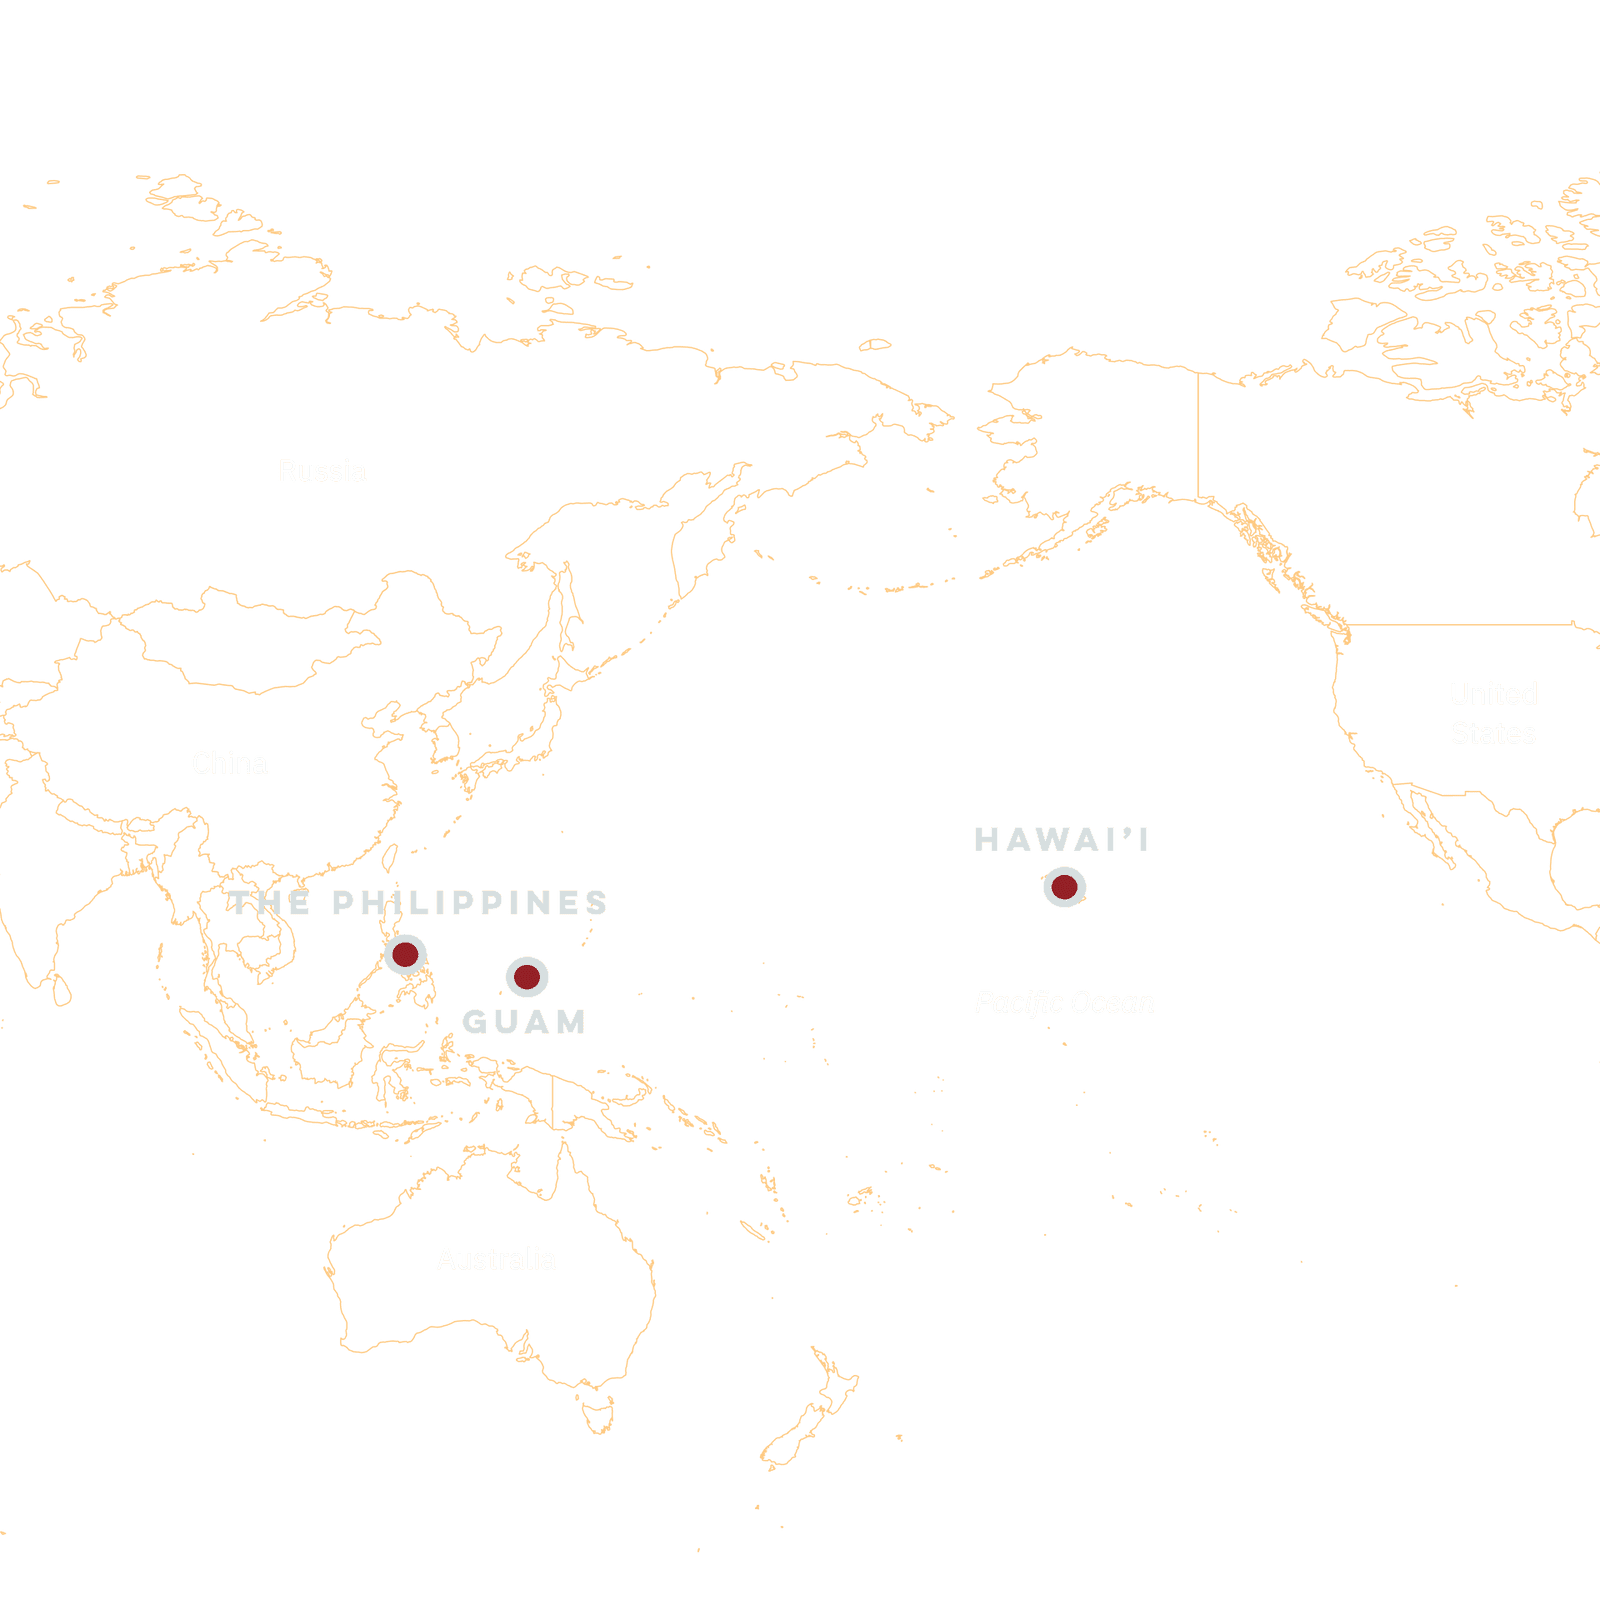 A map of the Pacific Ocean, highlighting the locations of the Philippines, Guam, and Hawai’i.